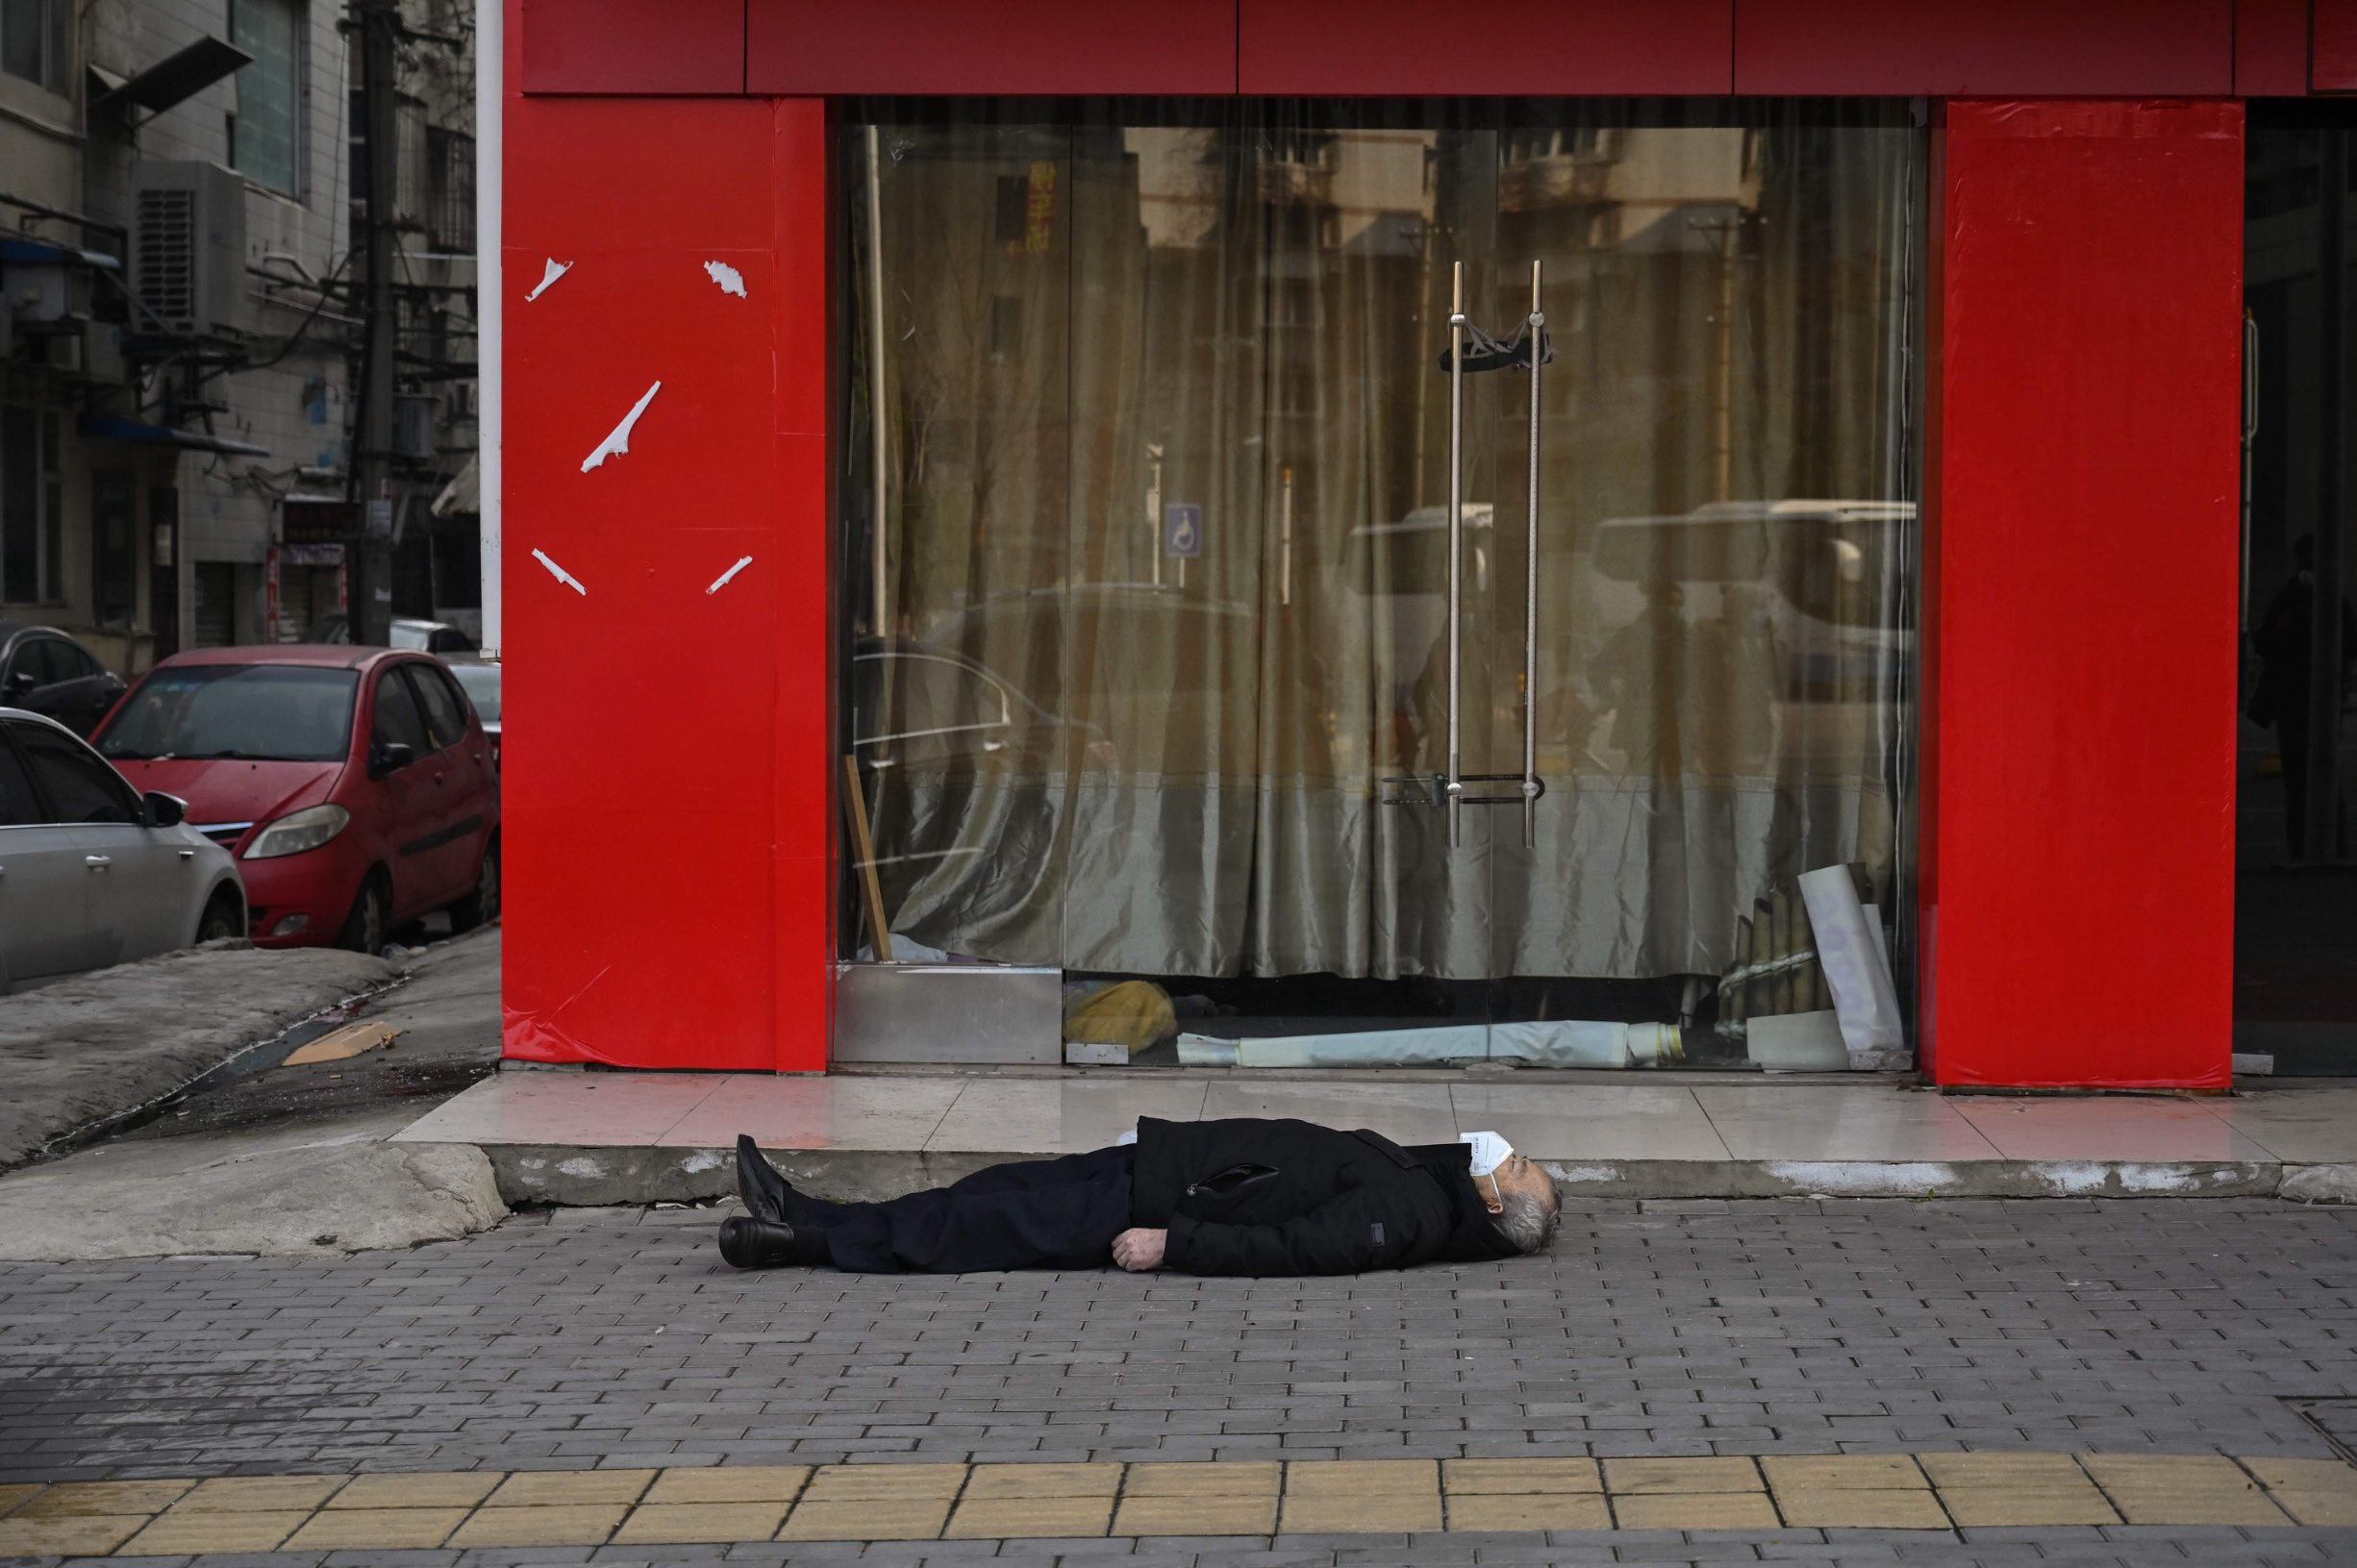 This photo taken on January 30, 2020 shows an elderly man wearing a facemask lying on the pavement after he collapsed and died along a street near a hospital in Wuhan. - AFP journalists saw the body on January 30, not long before an emergency vehicle arrived carrying police and medical staff in full-body protective suits. The World Health Organization declared a global emergency over the new coronavirus, as China reported on January 31 the death toll had climbed to 213 with nearly 10,000 infections. (Photo by Hector RETAMAL / AFP) / TO GO WITH China-health-virus-death,SCENE by Leo RAMIREZ and Sebastien RICCI